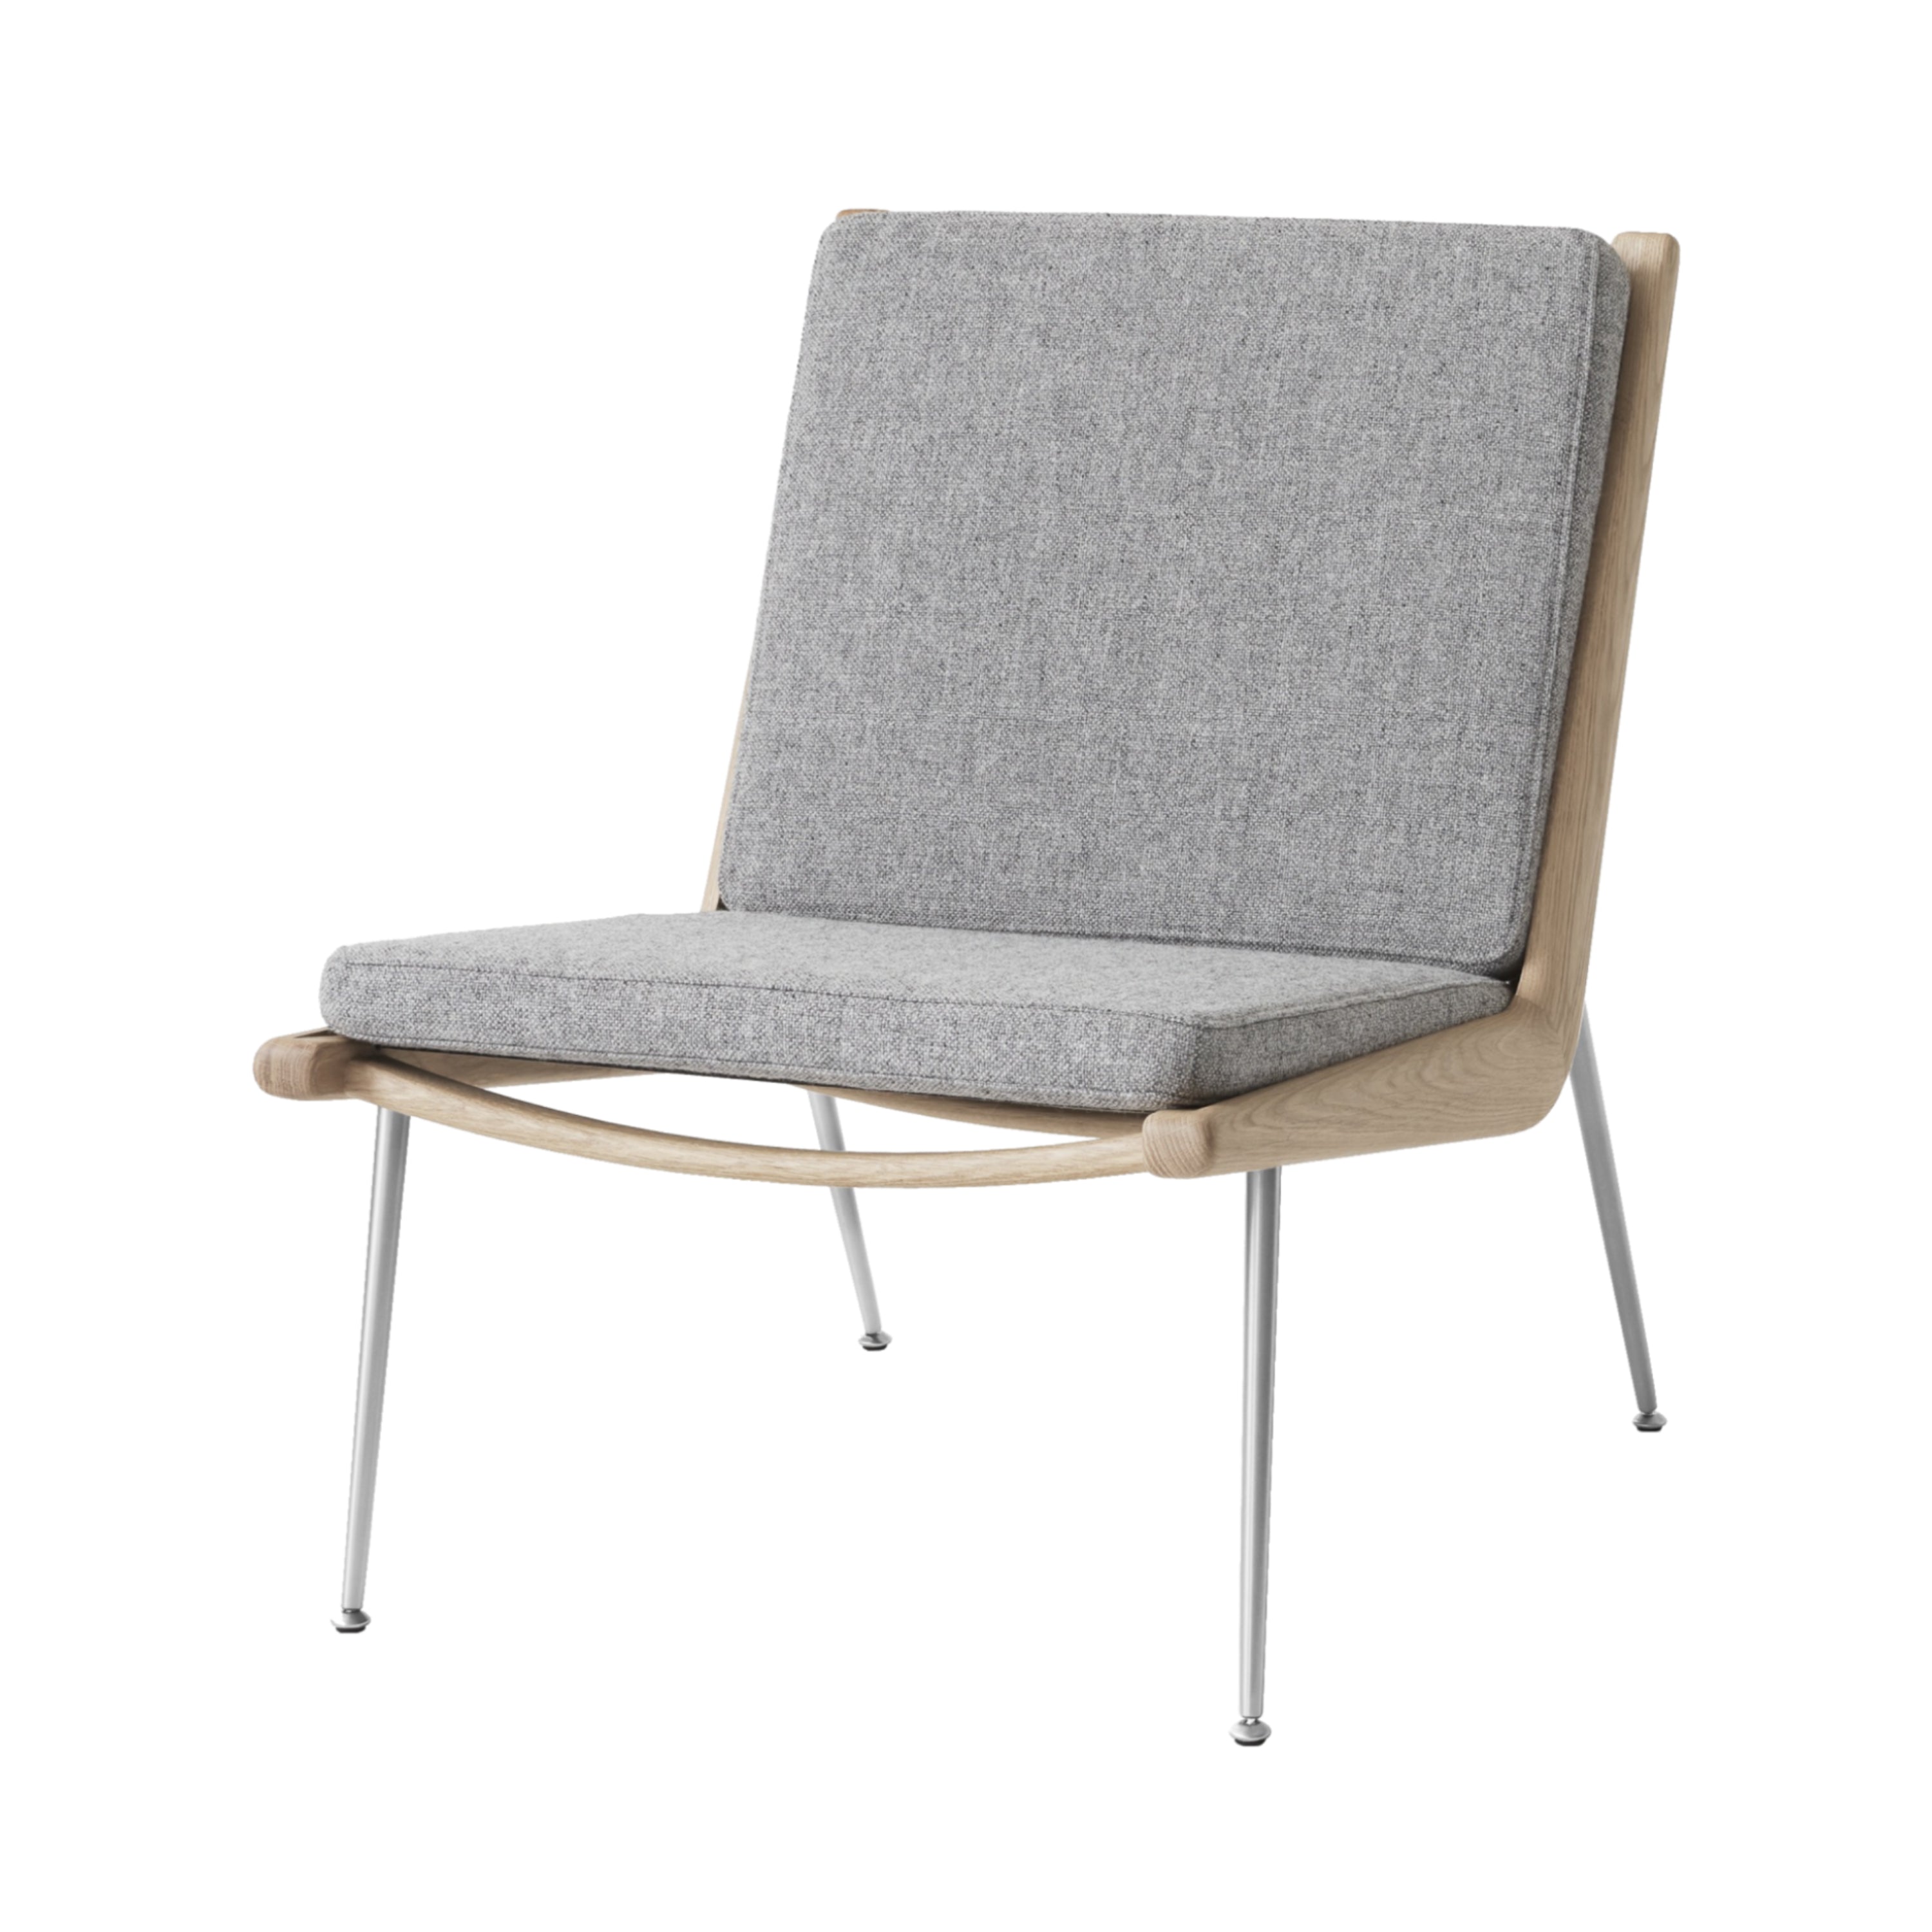 Boomerang Chair HM1: Oiled Oak + Stainless Steel